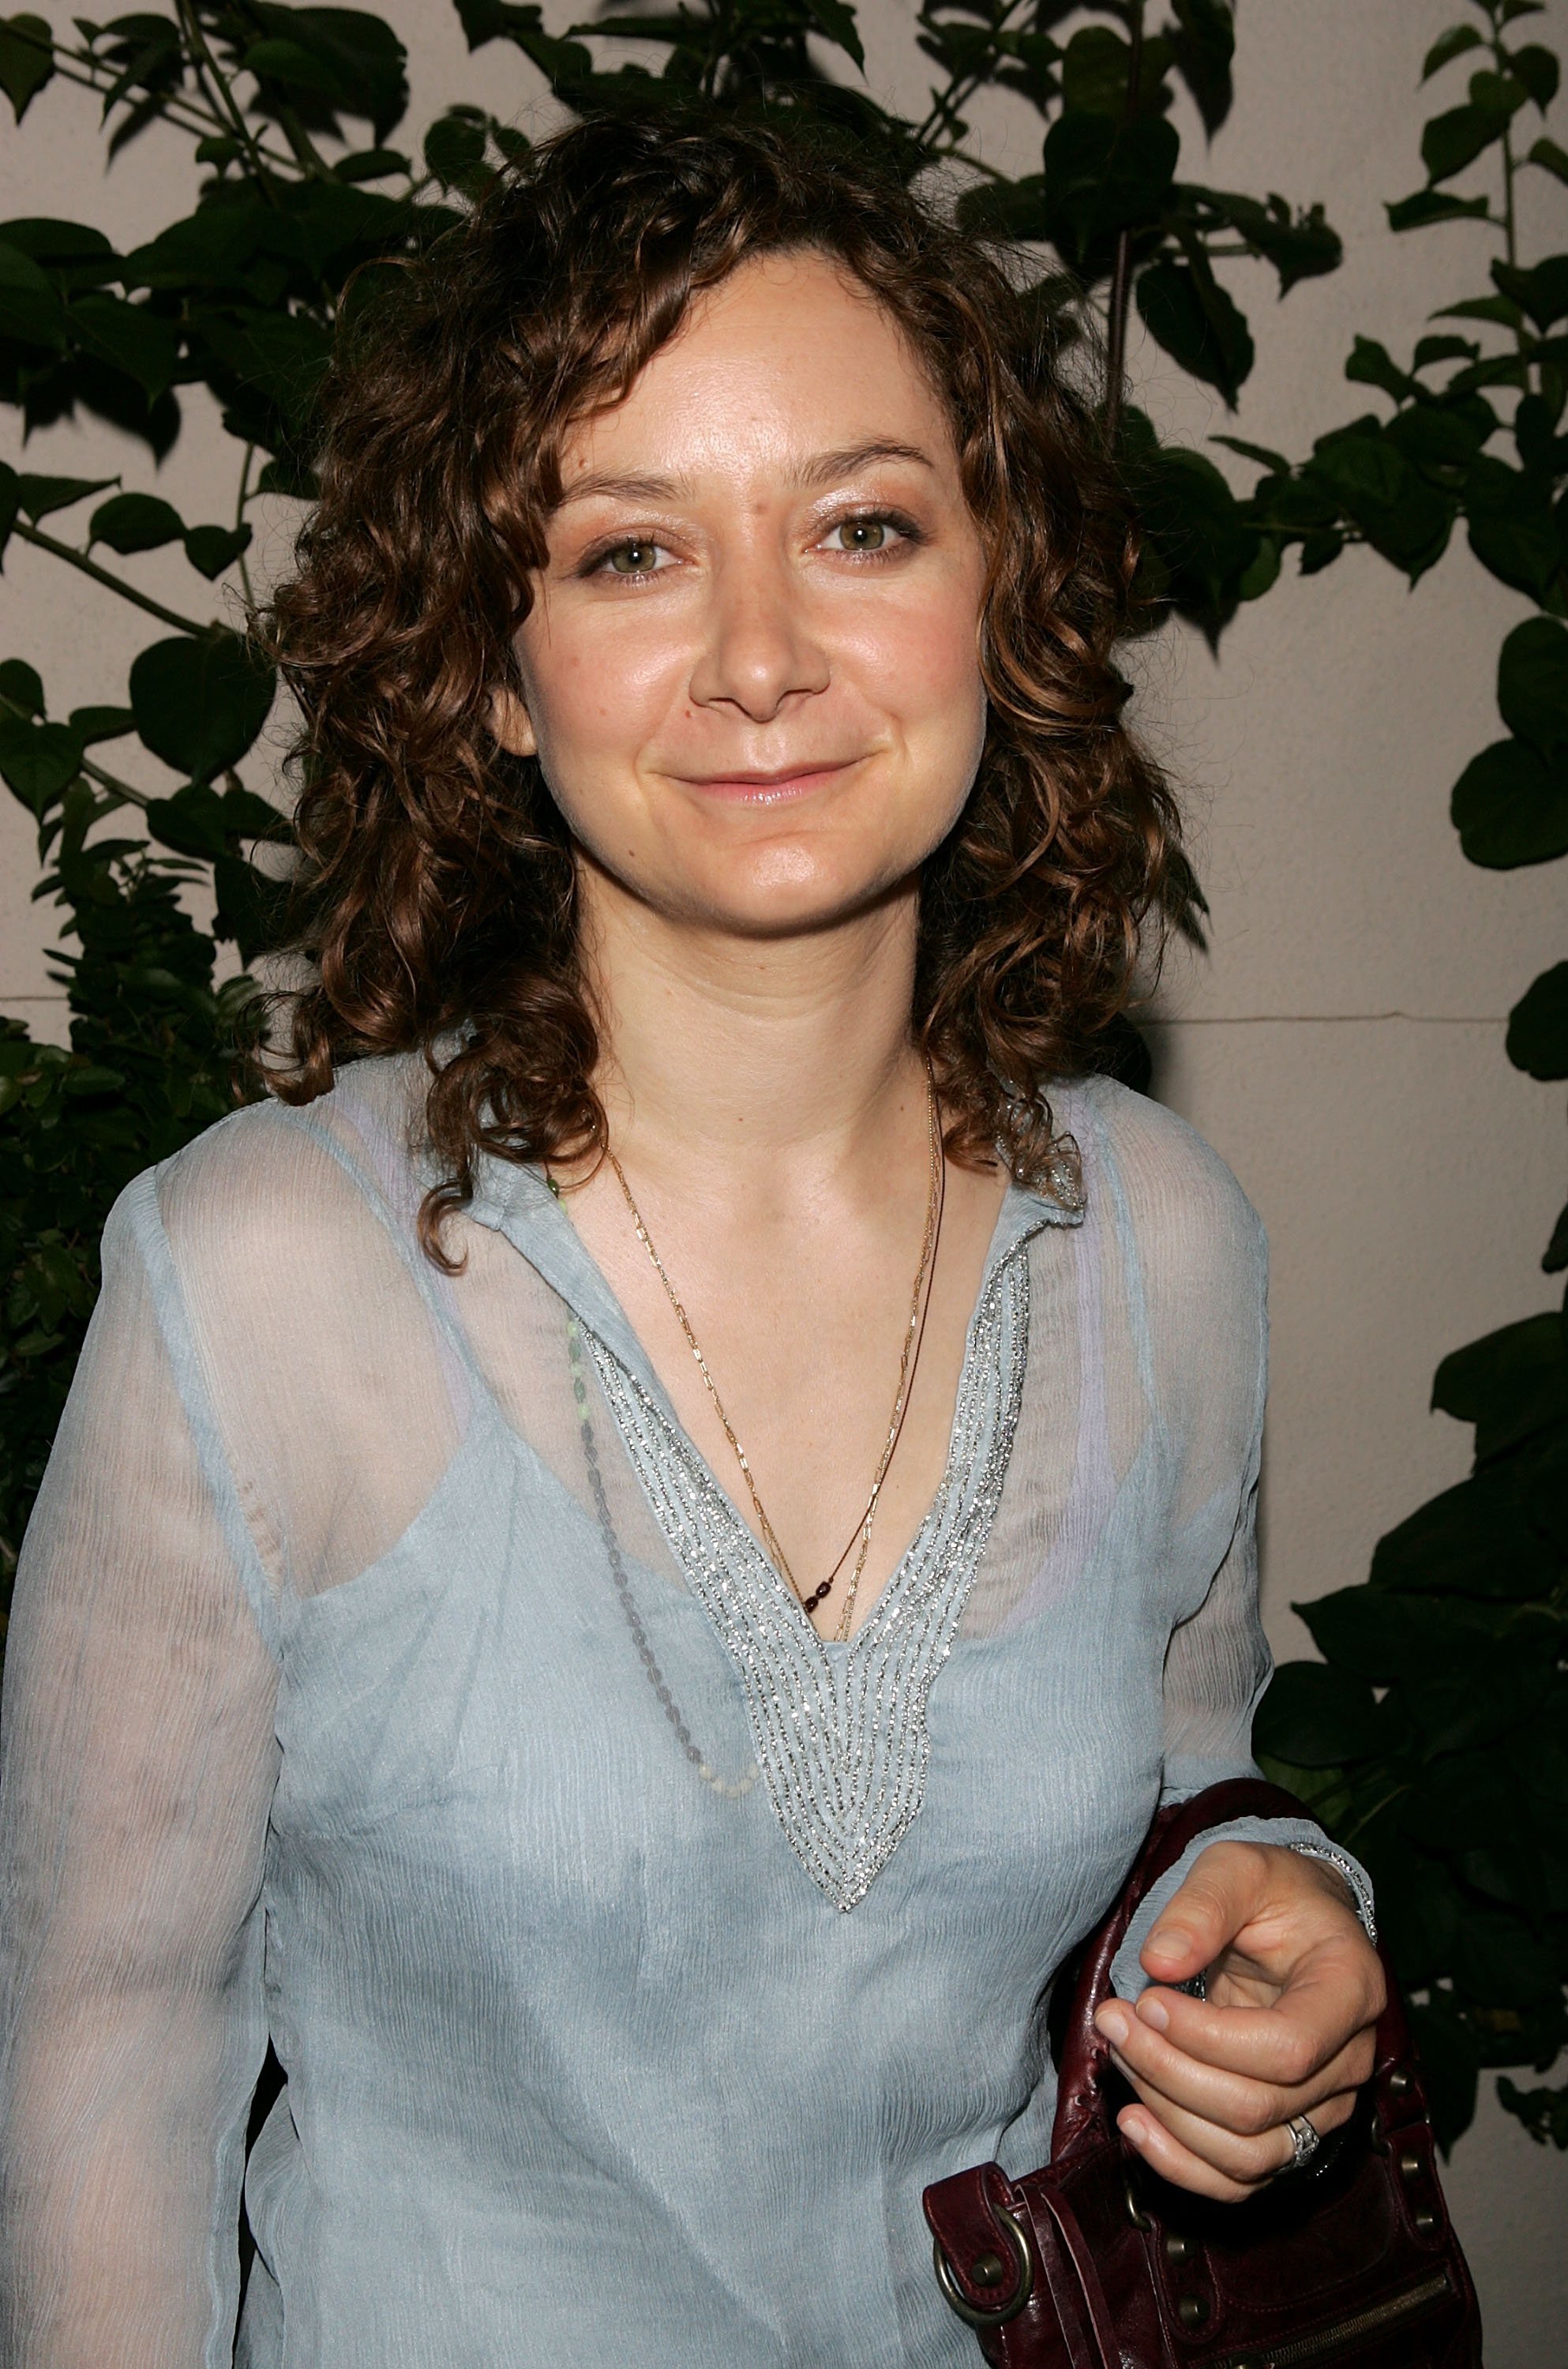 Sara Gilbert attends WB Network's 2005 All Star Celebration at The Cabana Club in Los Angeles in July 2005 | Photo: Getty Images